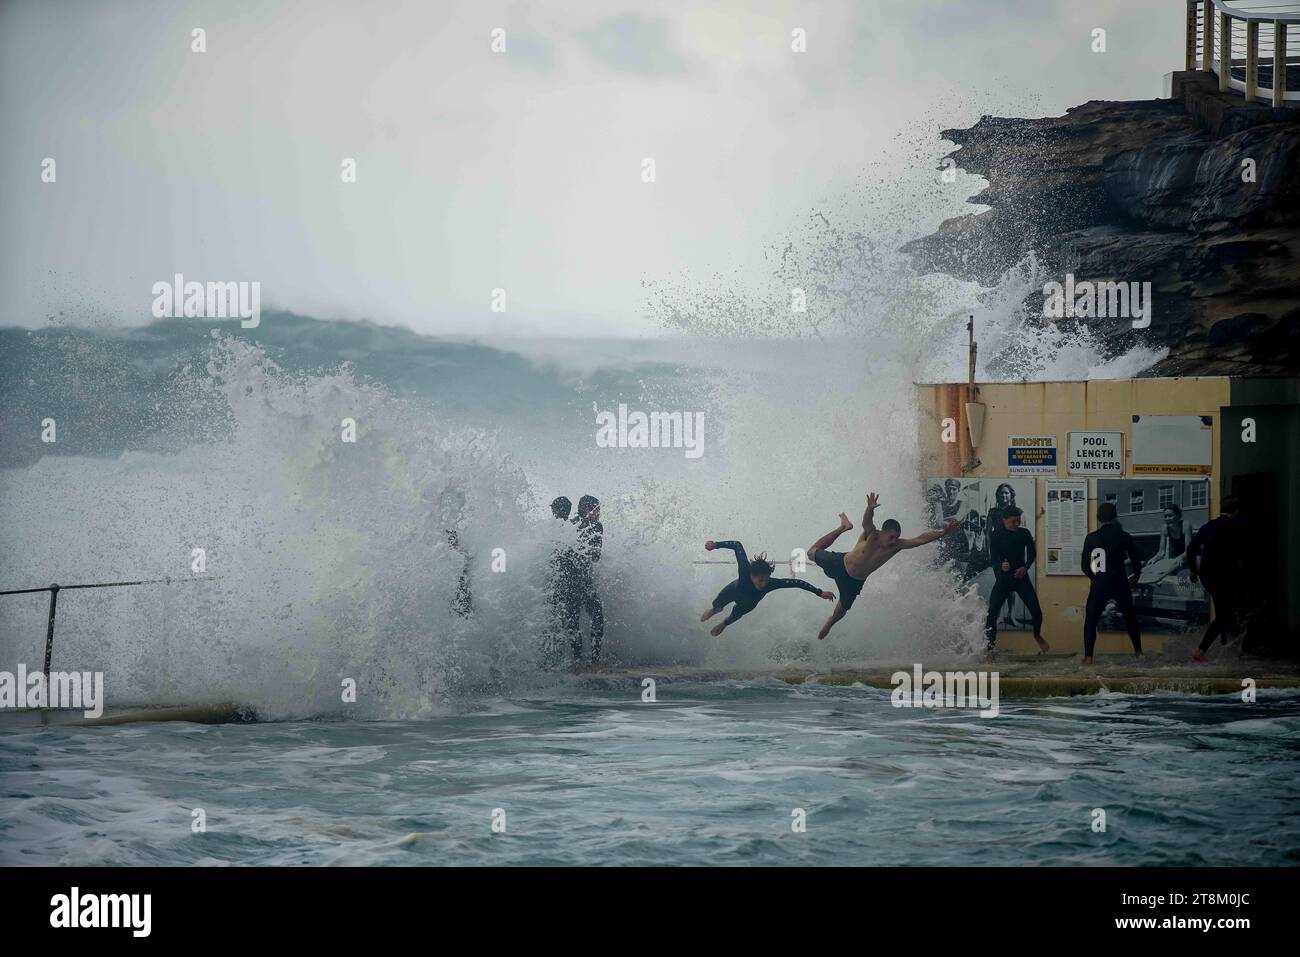 Swimmers dive into the Bronte ocean pool ahead of a large wave breaking. Stock Photo